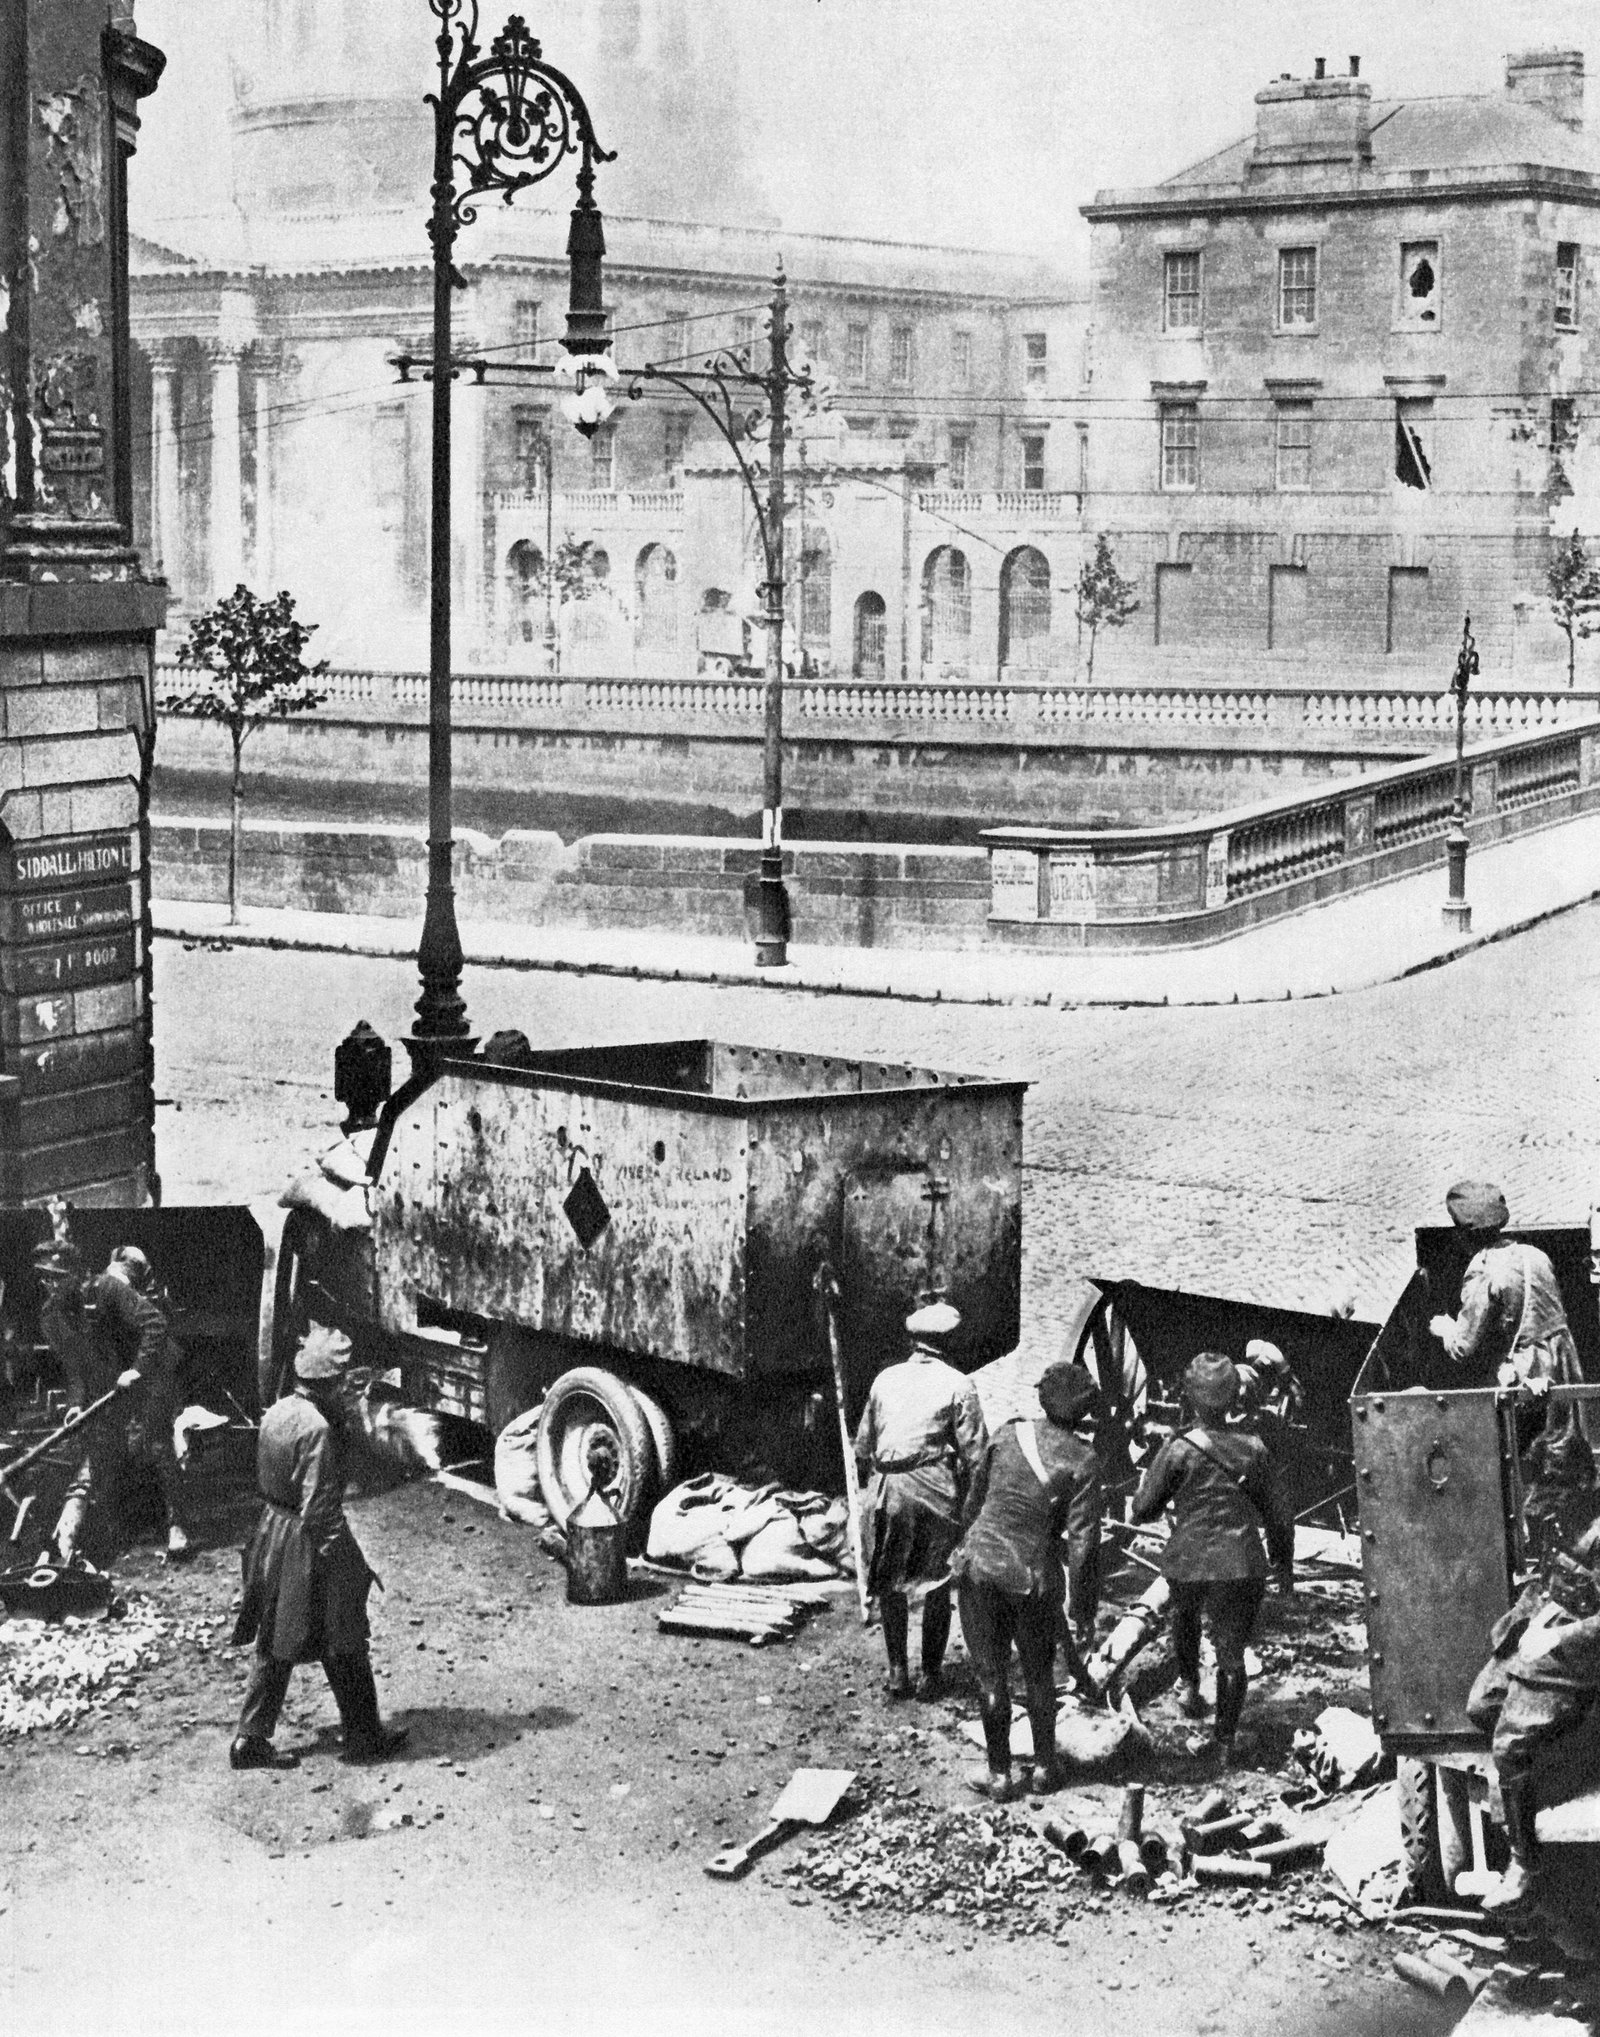 Image - 18-pounder guns attacking the Four Courts from Winetavern Street. Photo: Getty Images